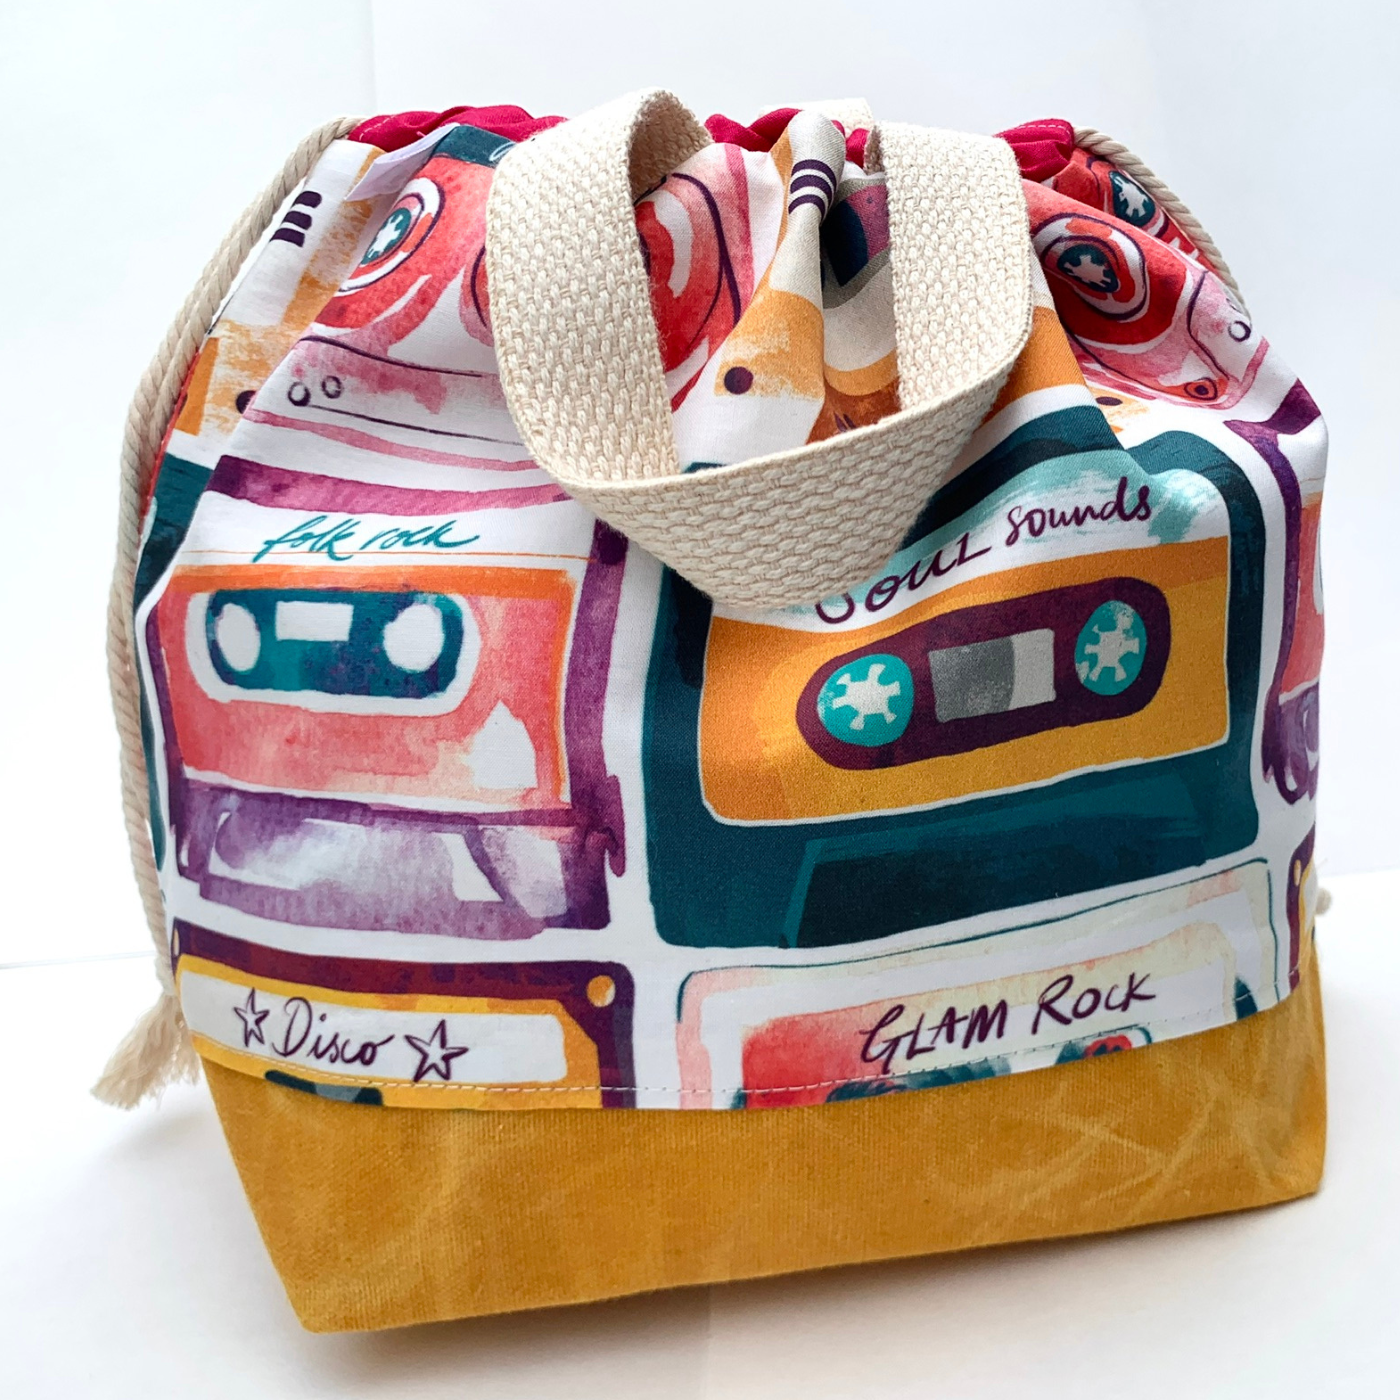 A fabric drawstring bag featuring a print with rows of watercolor cassette tapes, each titled a different 1970s rock genre, including disco, glam rock, soul sounds, folk rock, etc., and in a different muted jewel tone color, some yellow, some dark peach, some red, some dark green. The bag has a yellow fabric waxed bottom along with cream fabric handles and a drawstring closure.